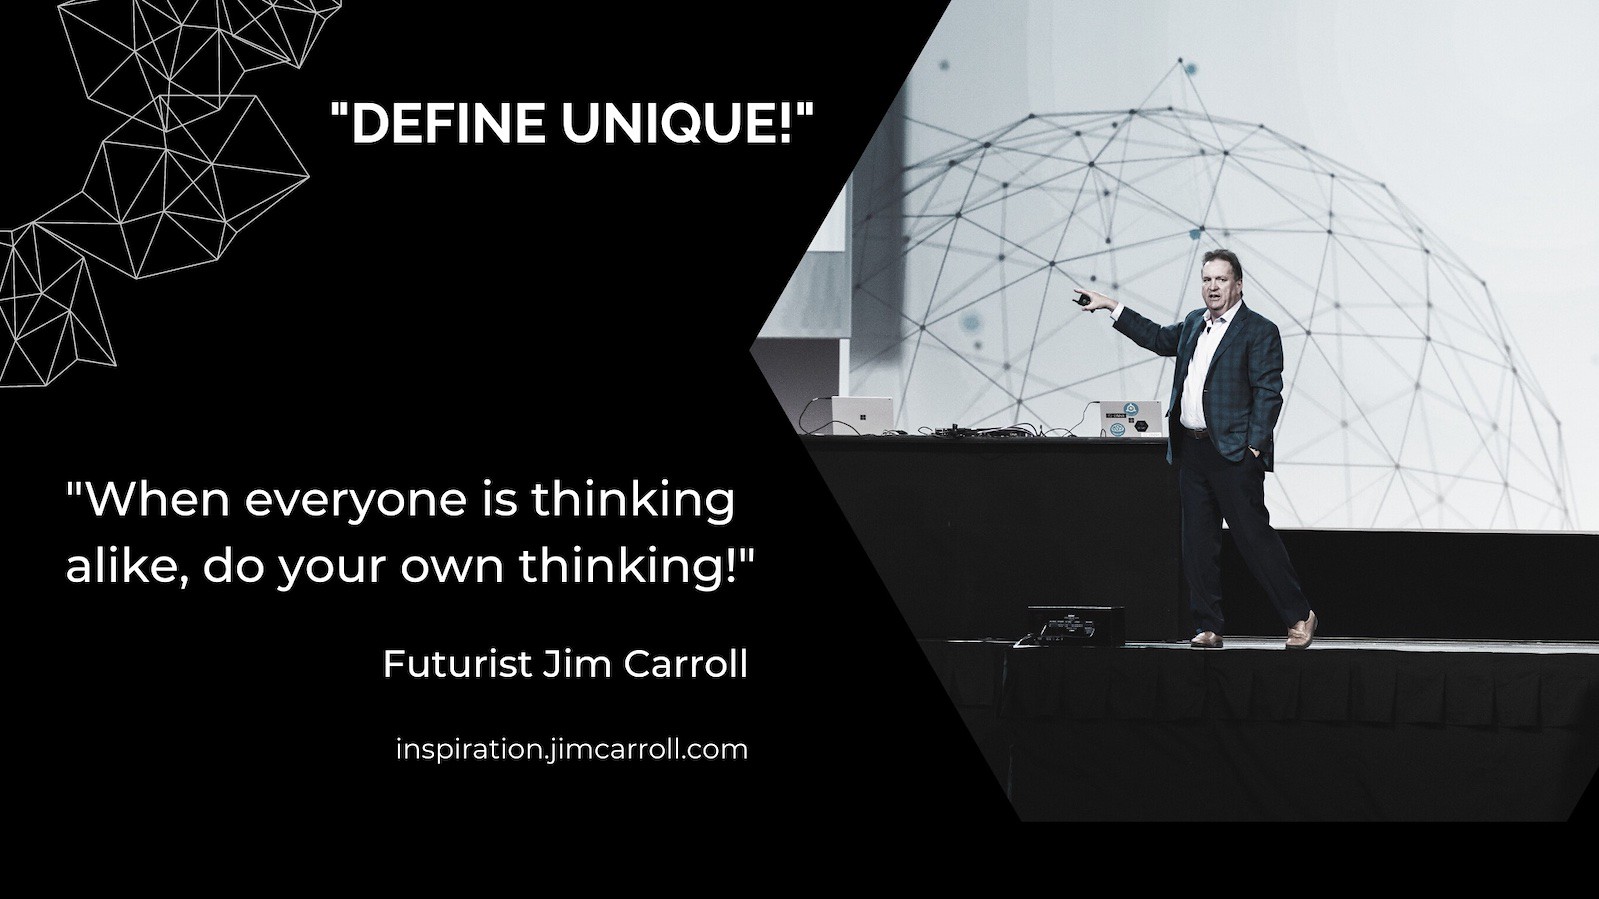 "When everyone is thinking alike, do your own thinking!" - Futurist Jim. Carroll